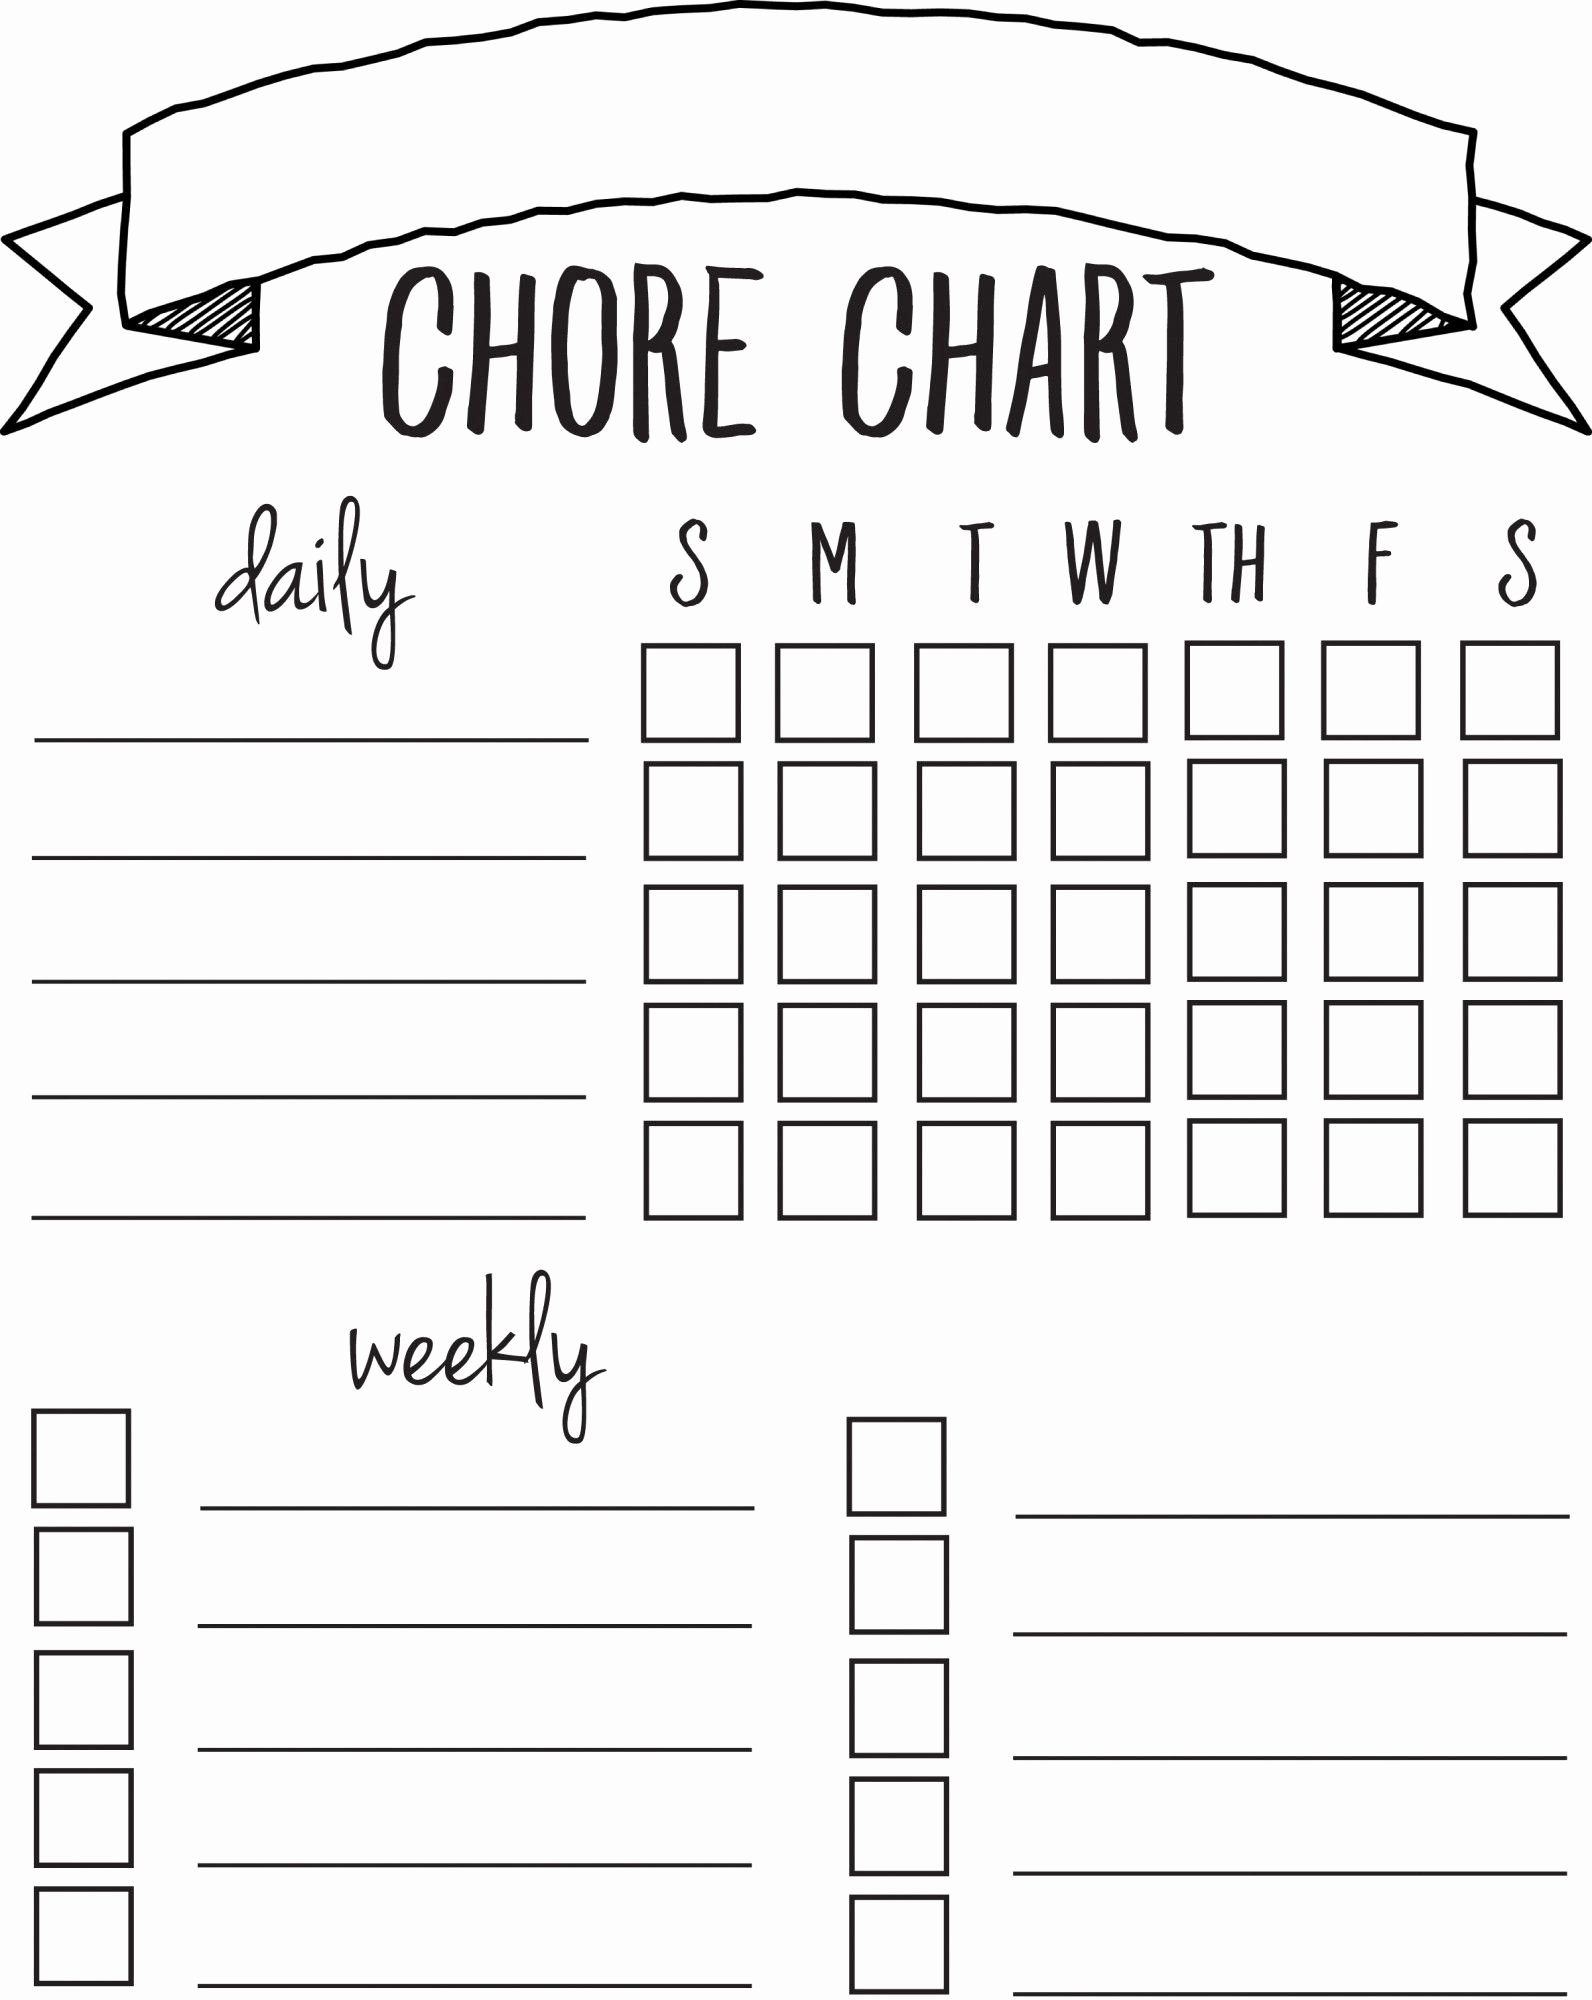 Chore Chart for Adults Templates Unique Diy Printable Chore Chart